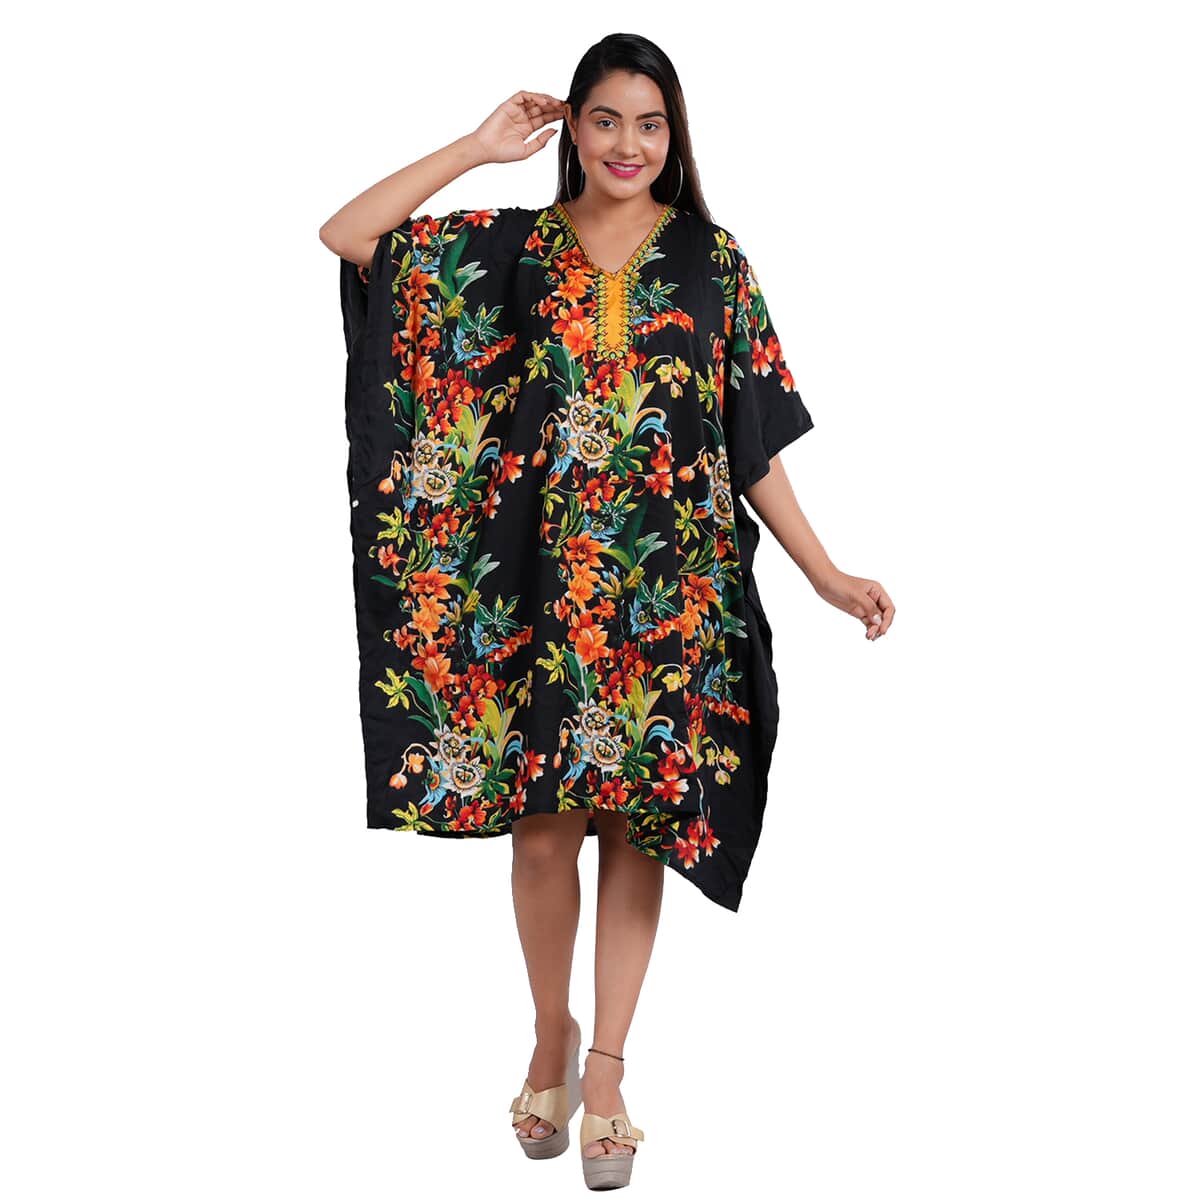 JOVIE Black Tropical Screen Printed Mid Short Kaftan - One Size Fits Most (15"Lx16"W) image number 0